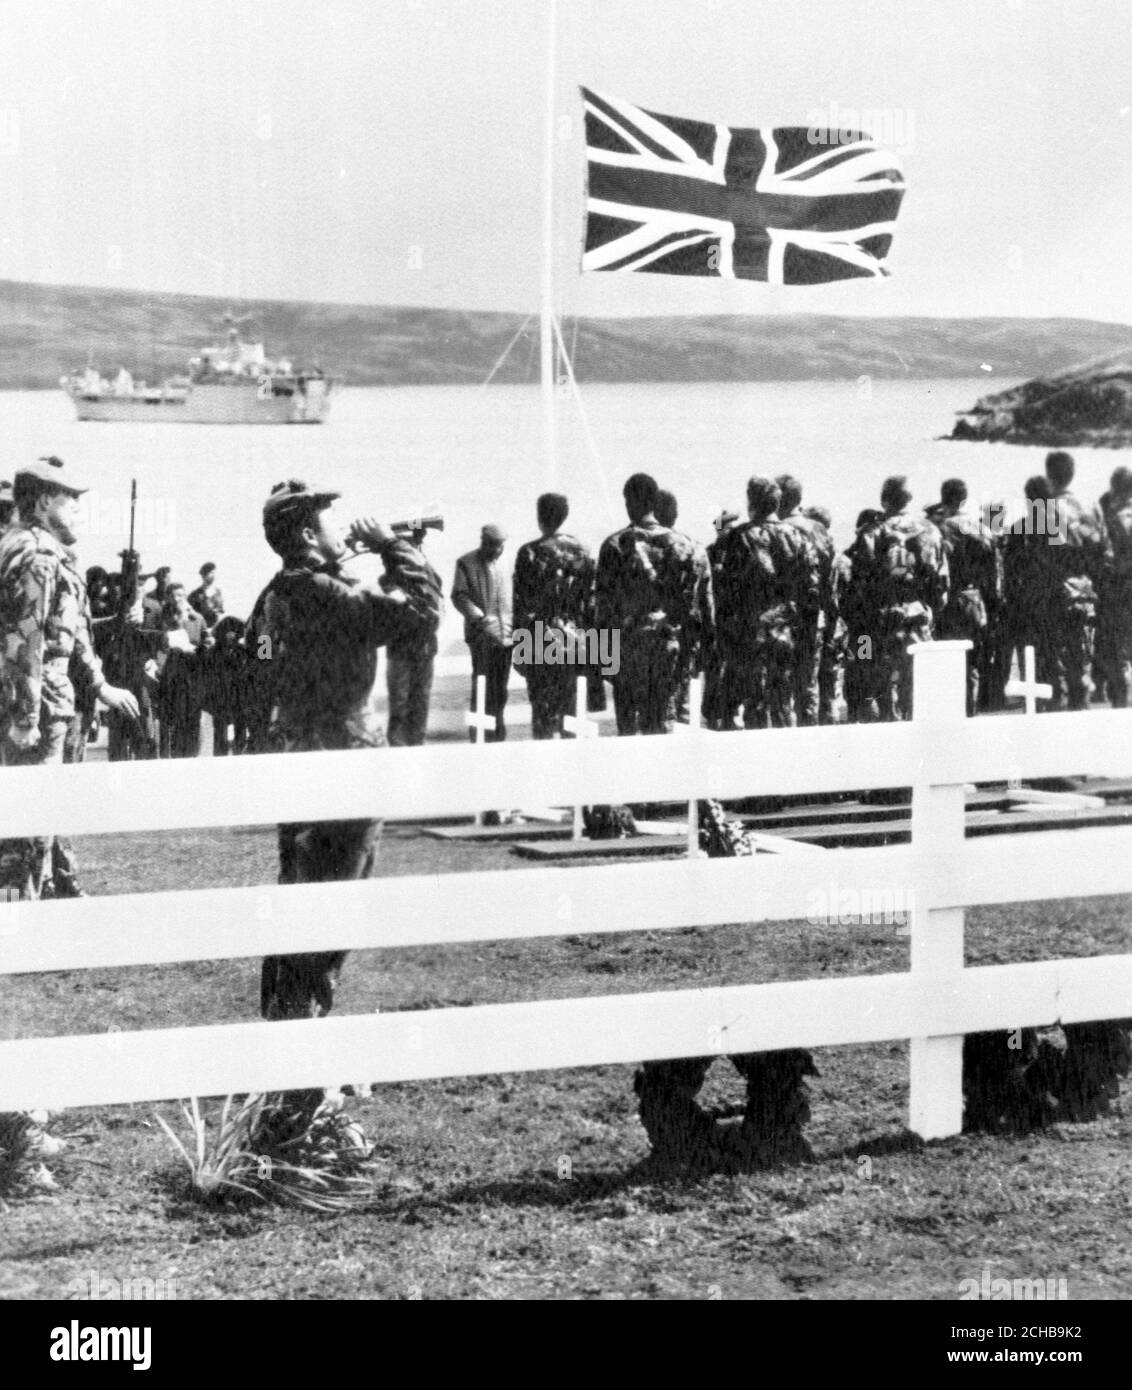 A Ministry of Defence picture released in London, which shows Private John Urquhart, 25, Queen's Own Highlanders, sounding the Last Post during the reburial ceremony at Blue Beach Military Cemetery, in Port San Carlos, of 14 men killed in the Falklands fighting. Stock Photo